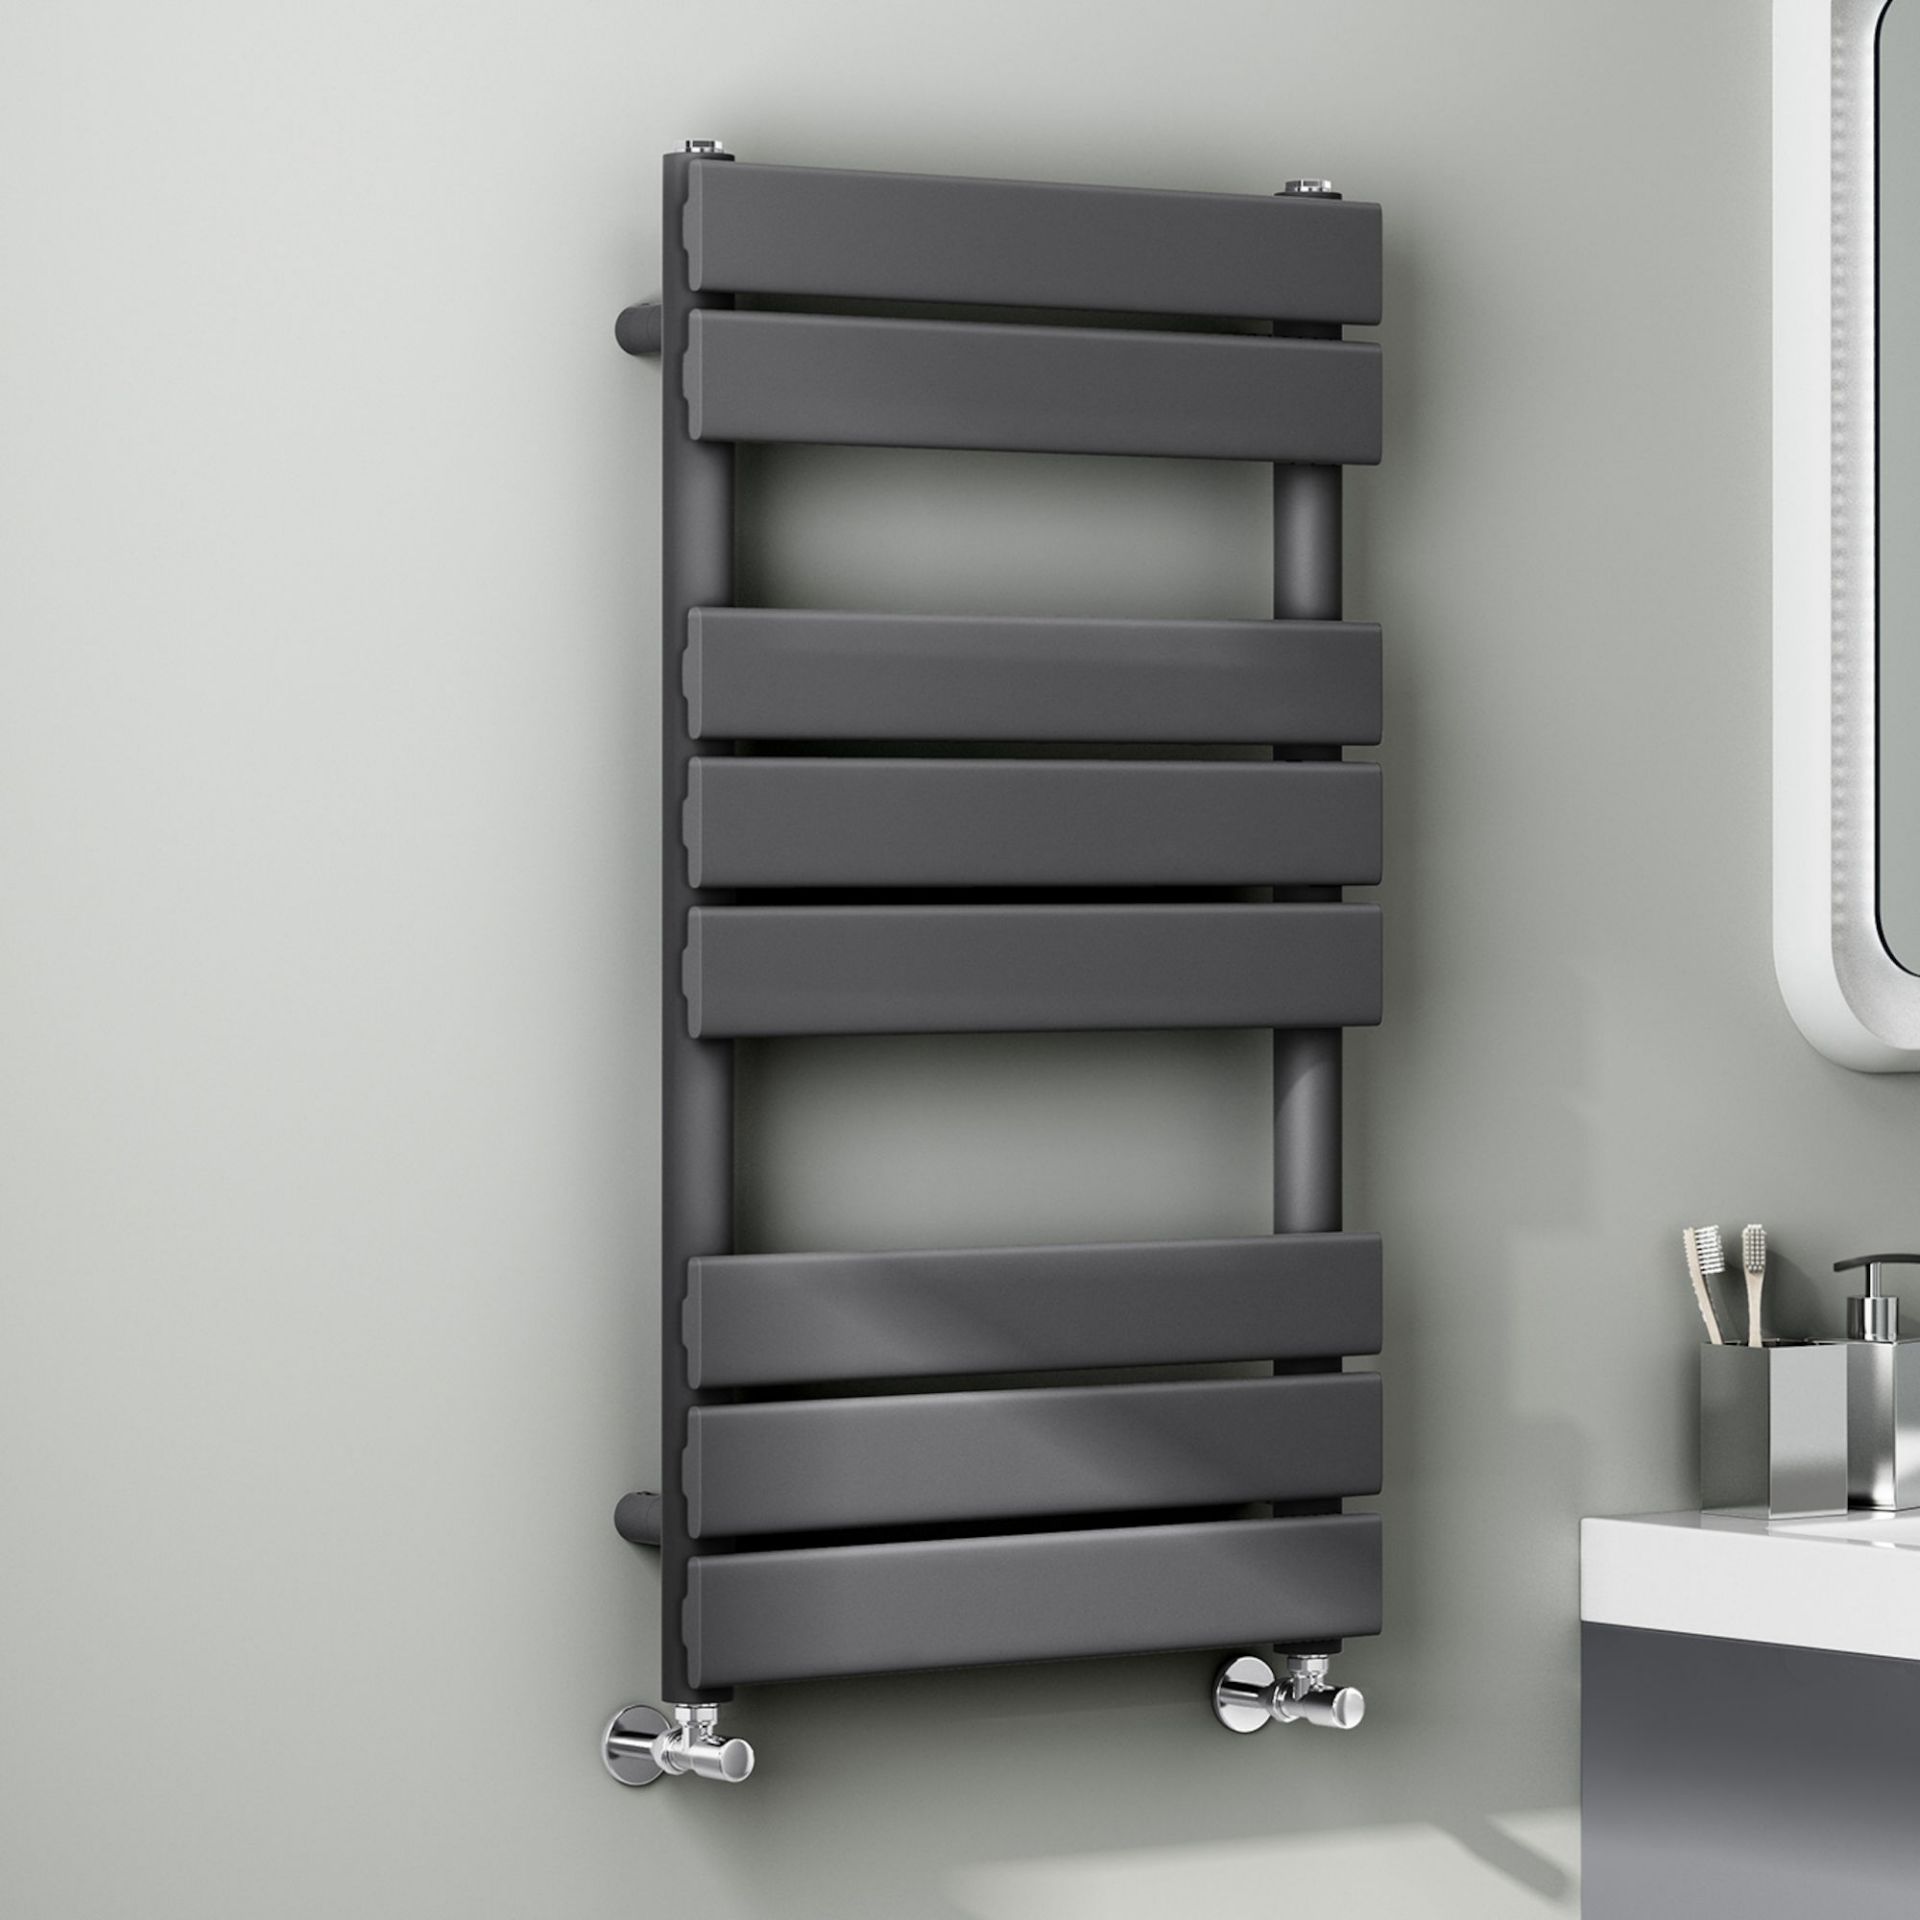 (XS320) 800x450mm Anthracite Flat Panel Ladder Towel Radiator. Made with low carbon steel,